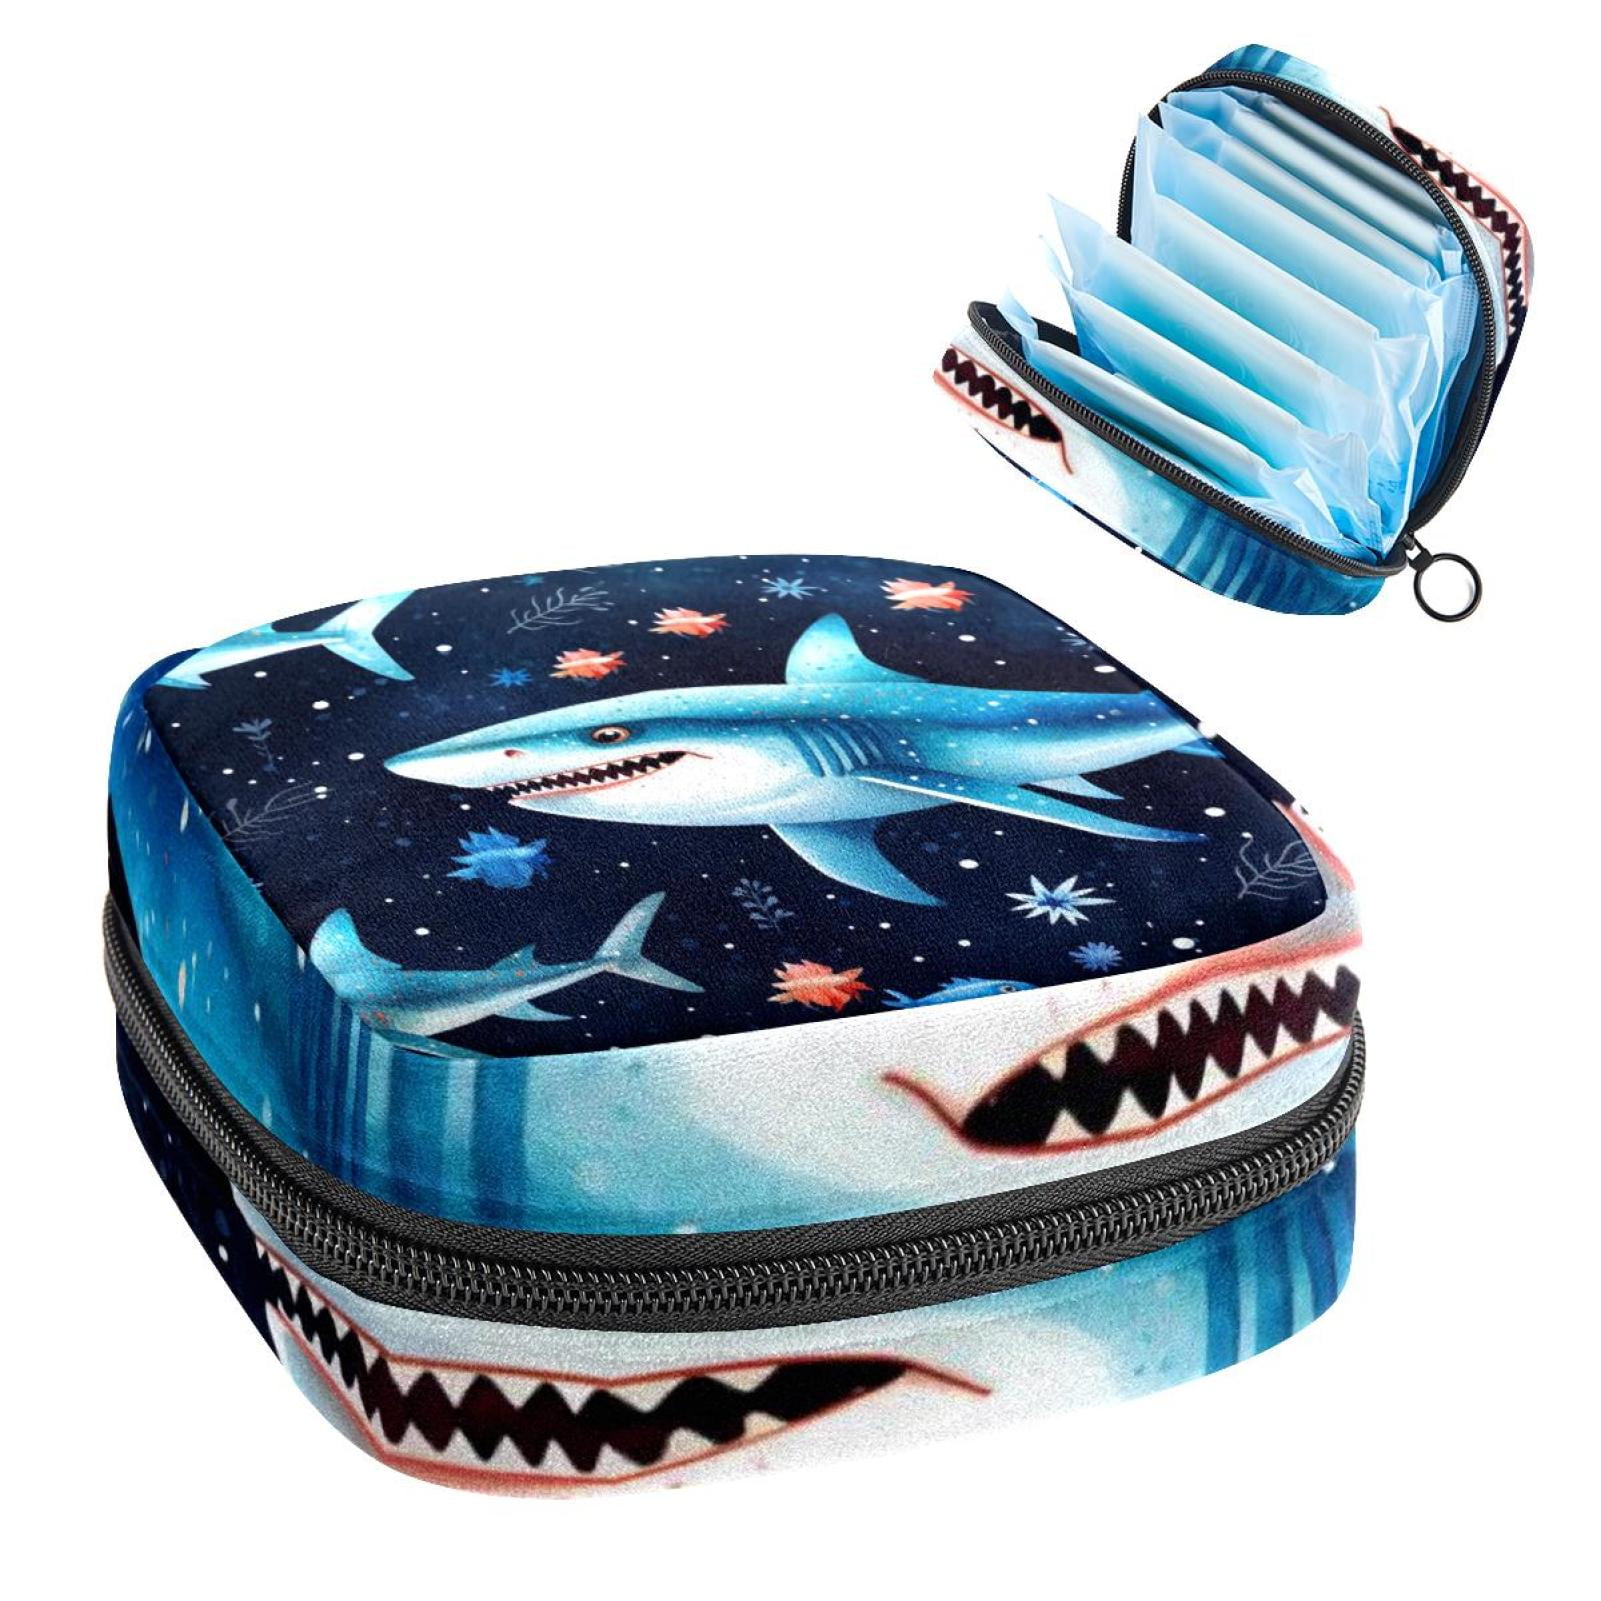 Shark Sanitary Bags Pad Bag Hidden Money Pouch for Travel Small Storage ...